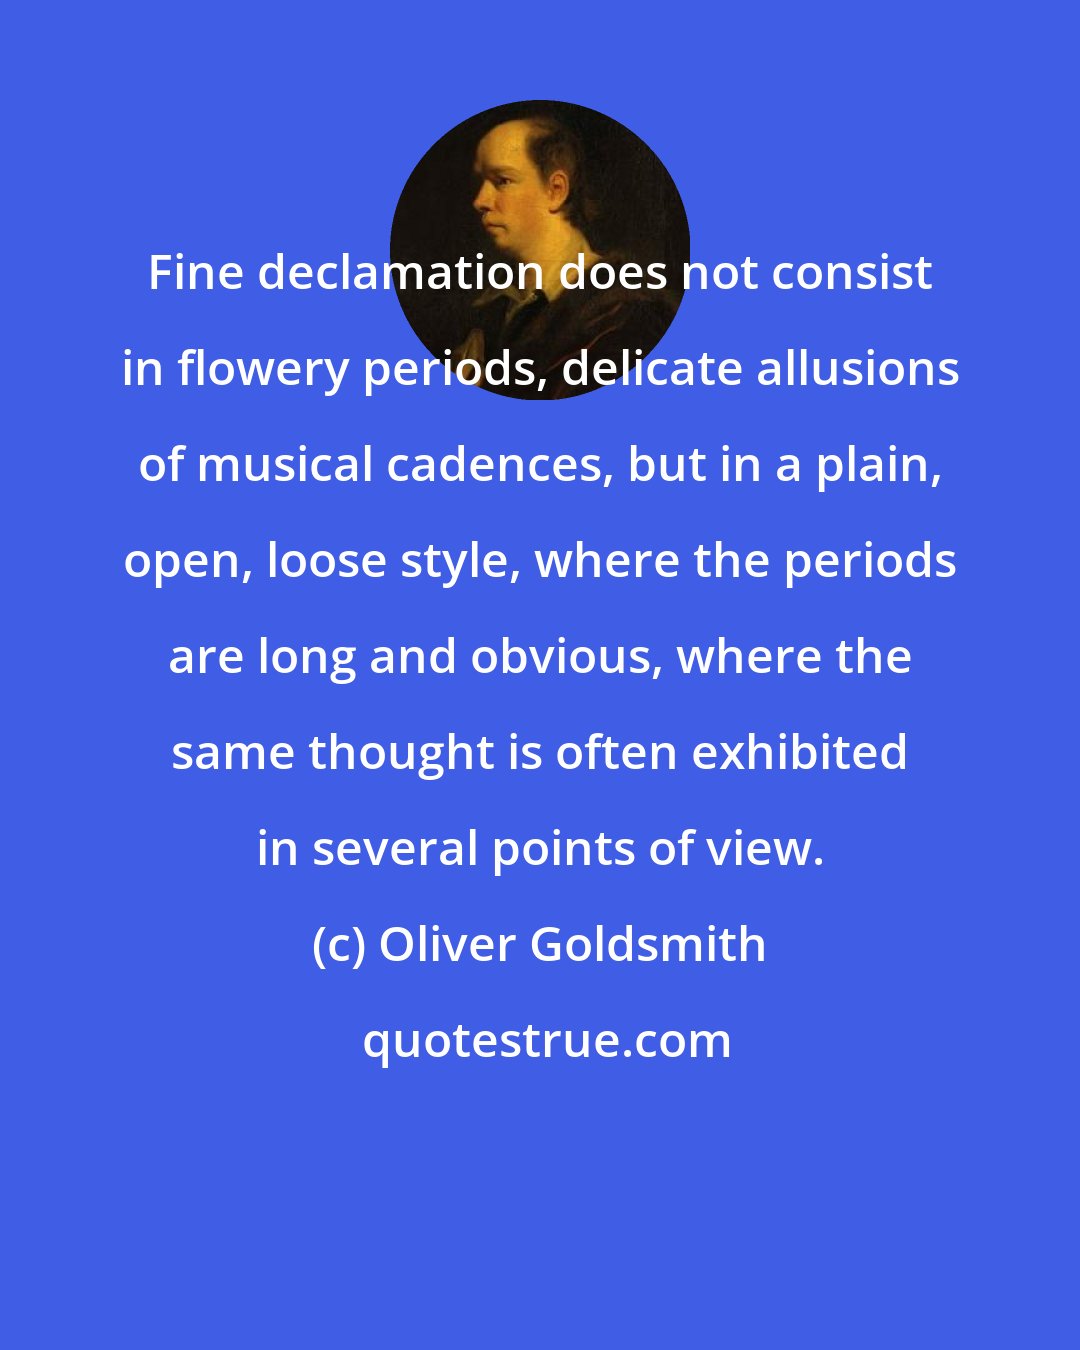 Oliver Goldsmith: Fine declamation does not consist in flowery periods, delicate allusions of musical cadences, but in a plain, open, loose style, where the periods are long and obvious, where the same thought is often exhibited in several points of view.